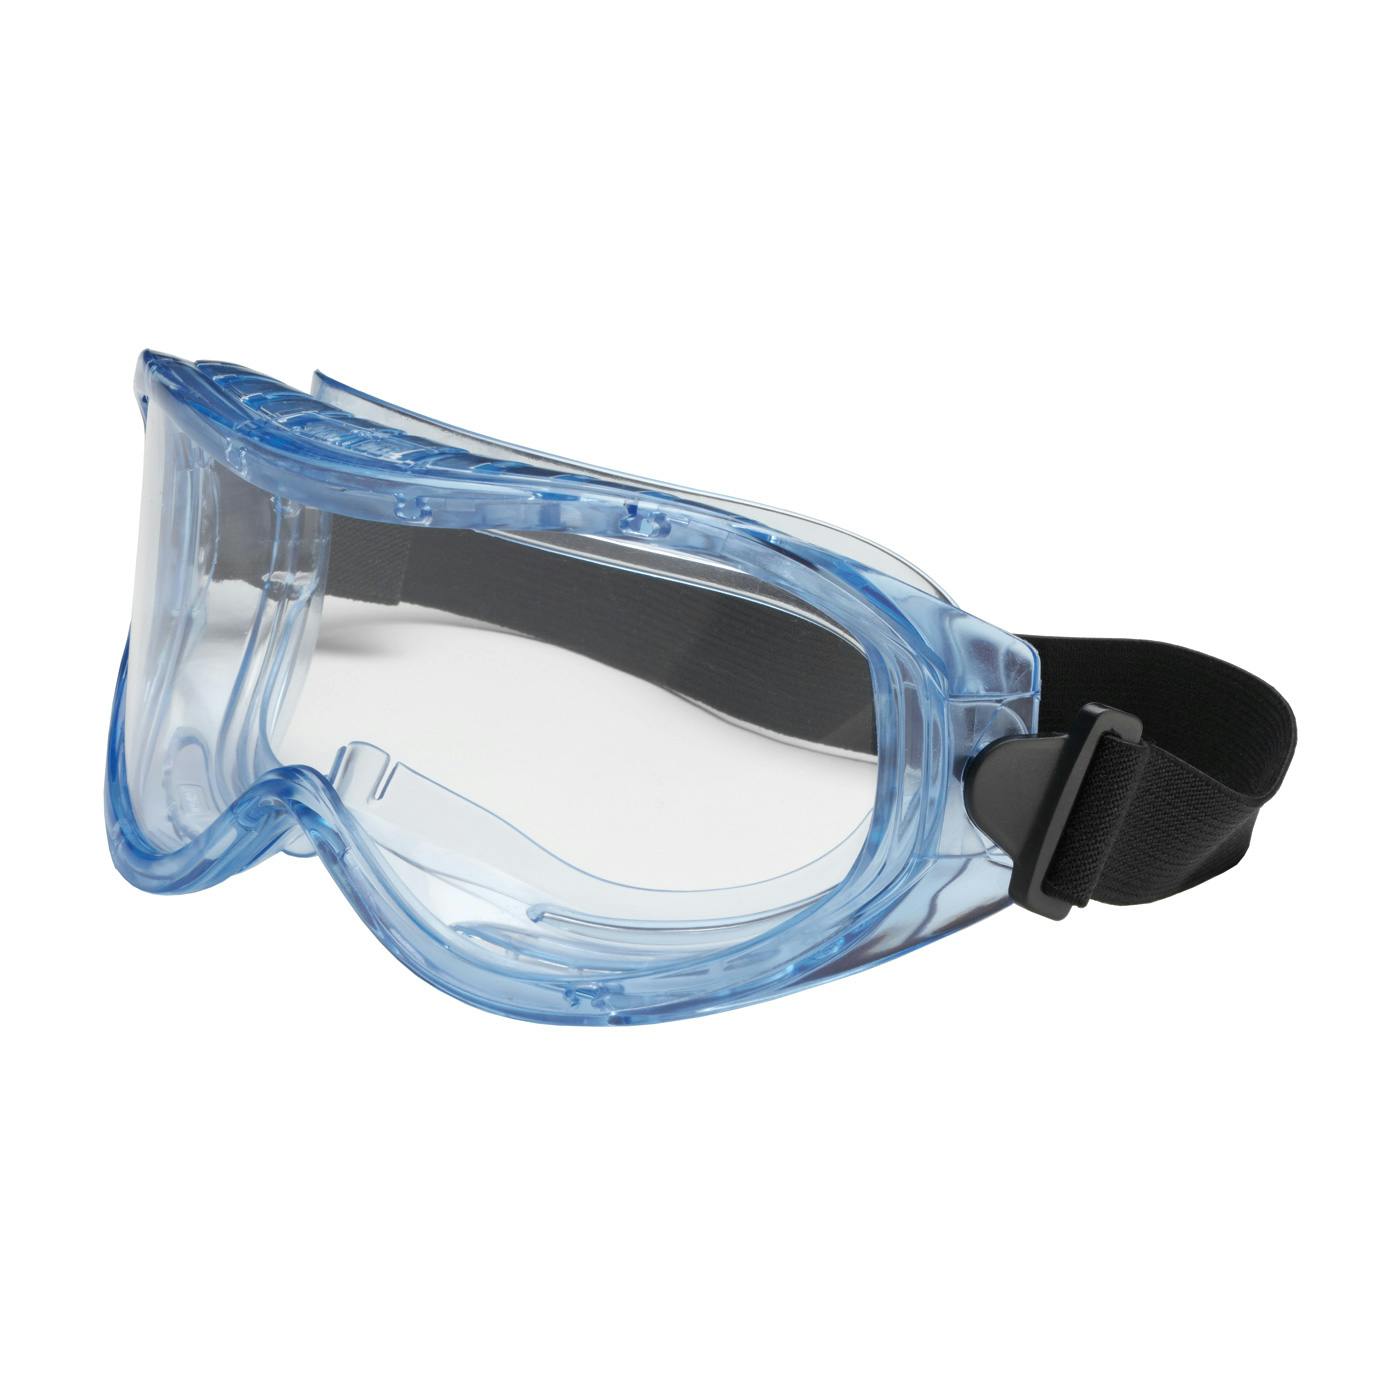 Indirect Vent Goggle with Light Blue Body, Clear Lens and Anti-Scratch Coating, Light Blue (251-5300-000) - OS